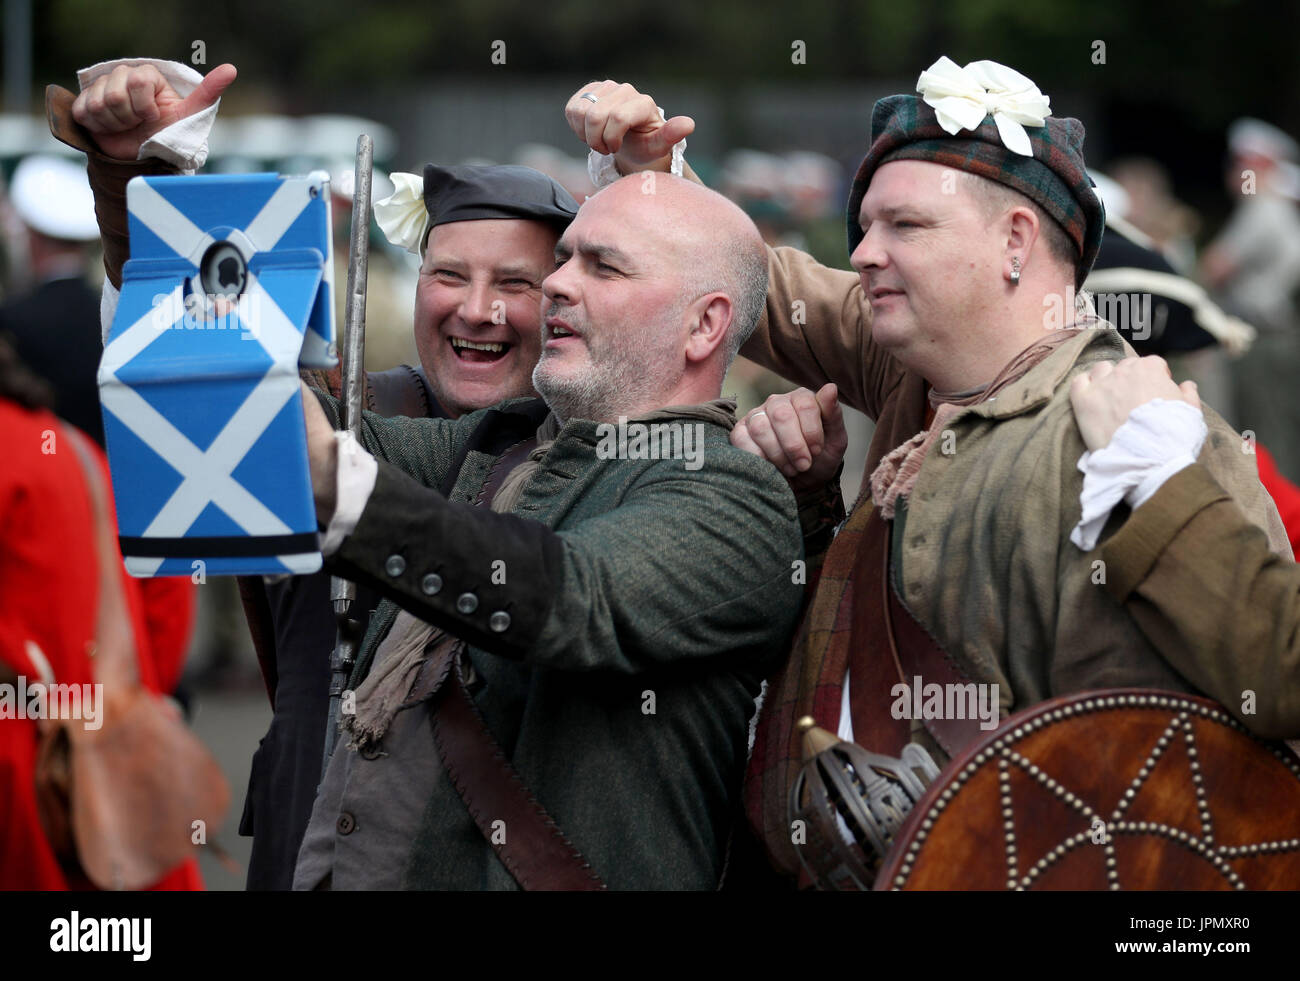 Members of the Jacobite re-enactment group take a selfie during the rehearsal for The Royal Military Edinburgh Tattoo at Redford Barracks, Edinburgh. Stock Photo